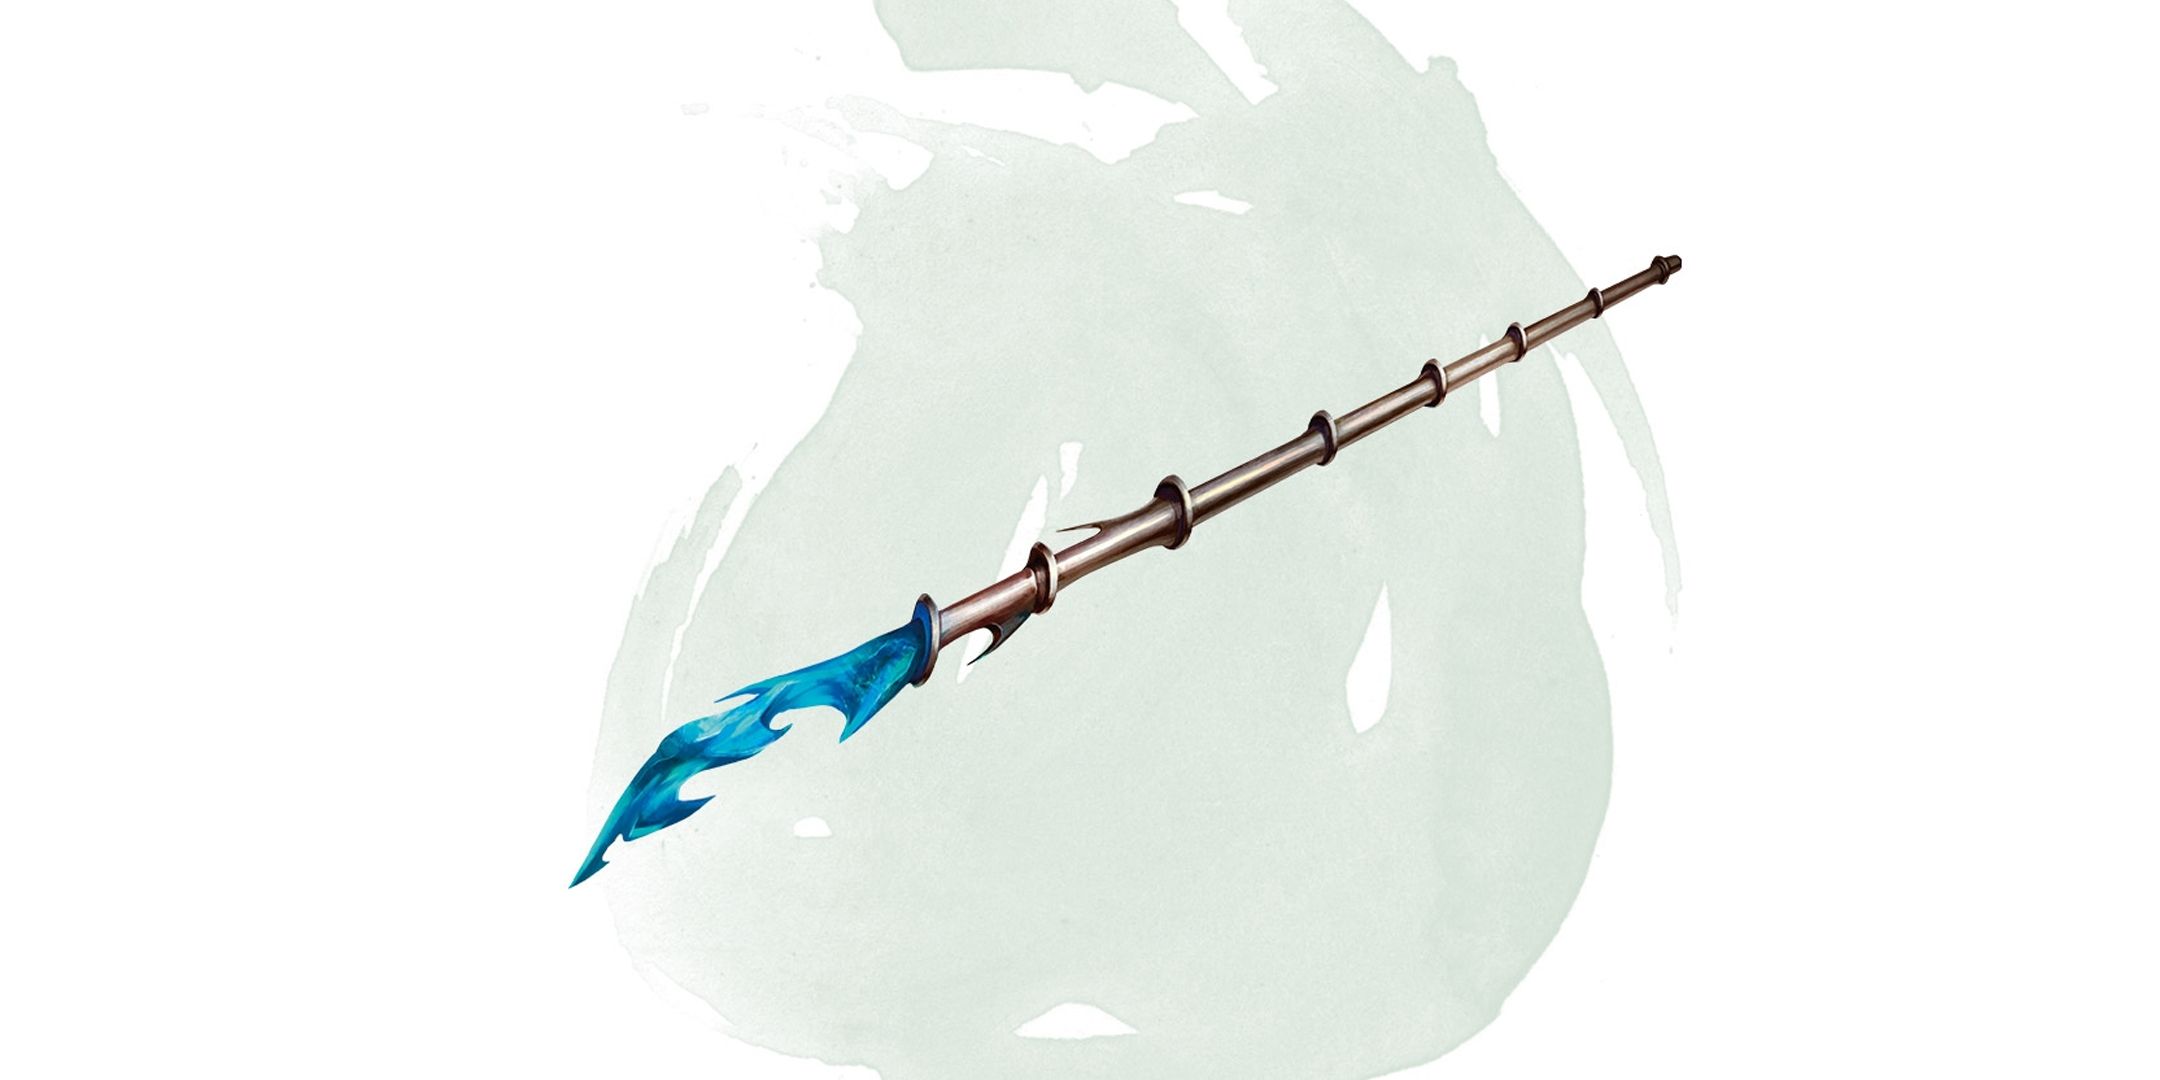 D&D art of a staff tipped with a carved blue crystal.